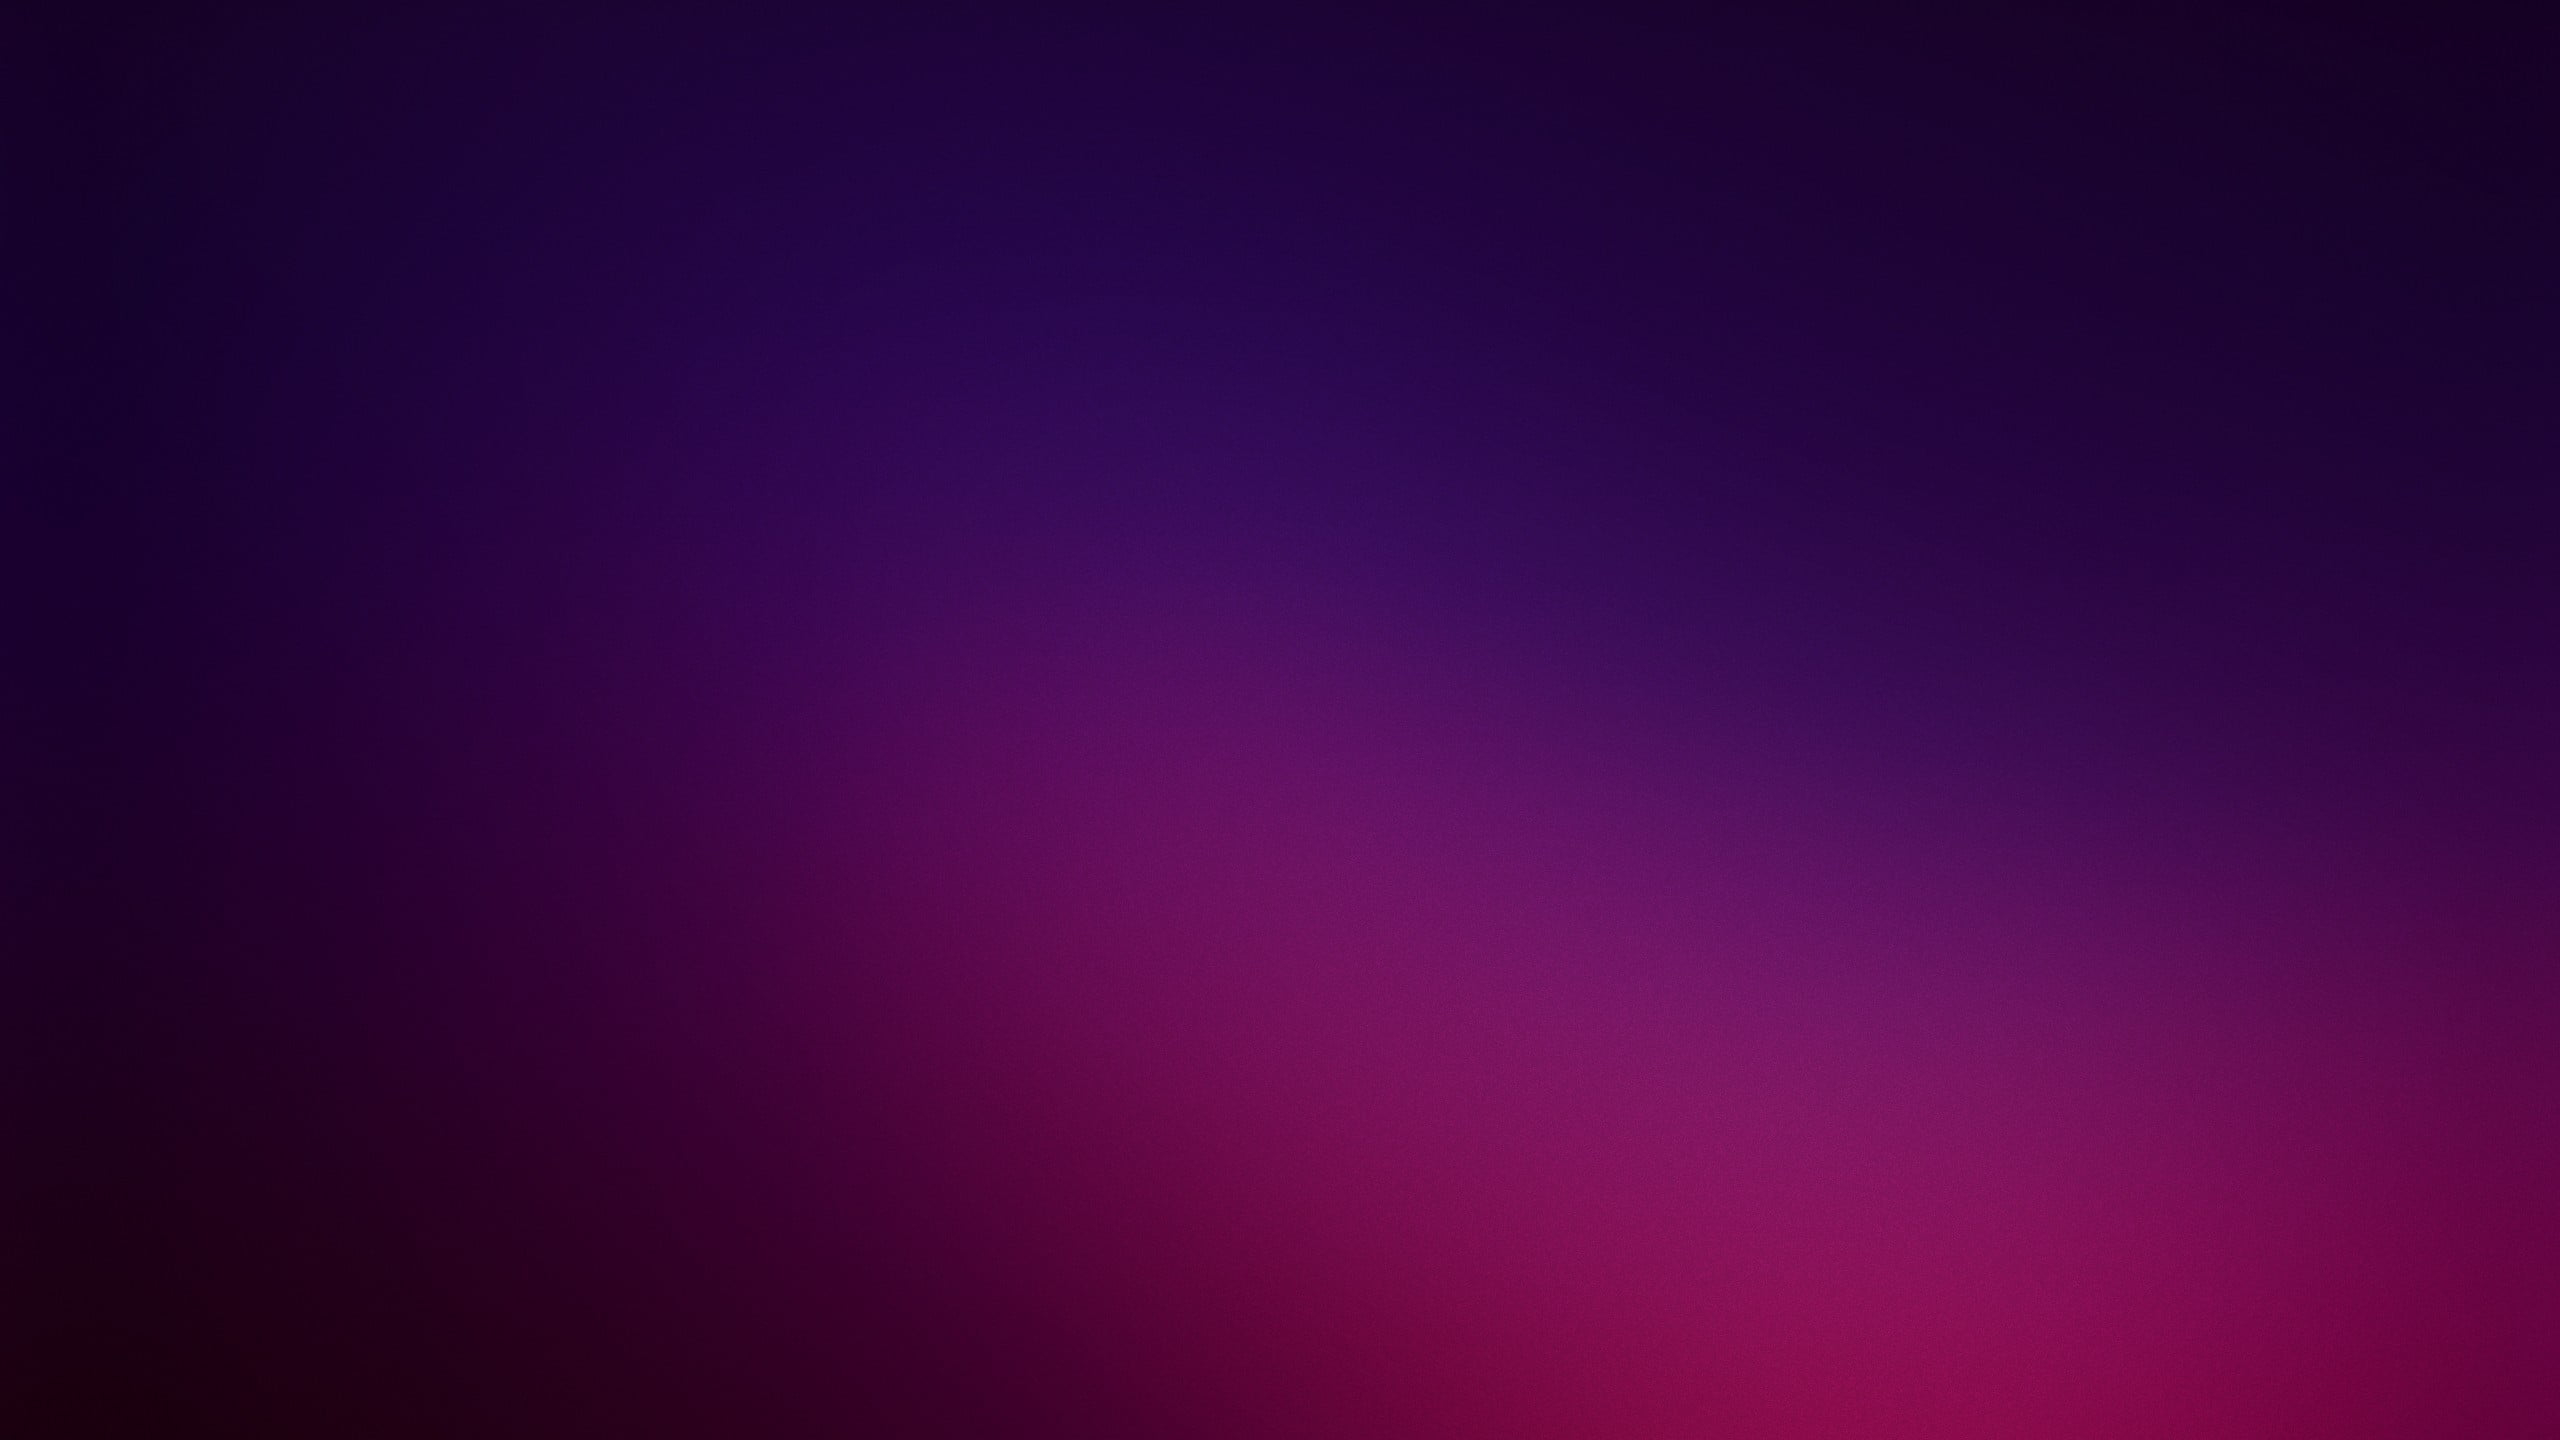 Simple wallpaper, gradient, minimalism, backgrounds, full-frame, abstract